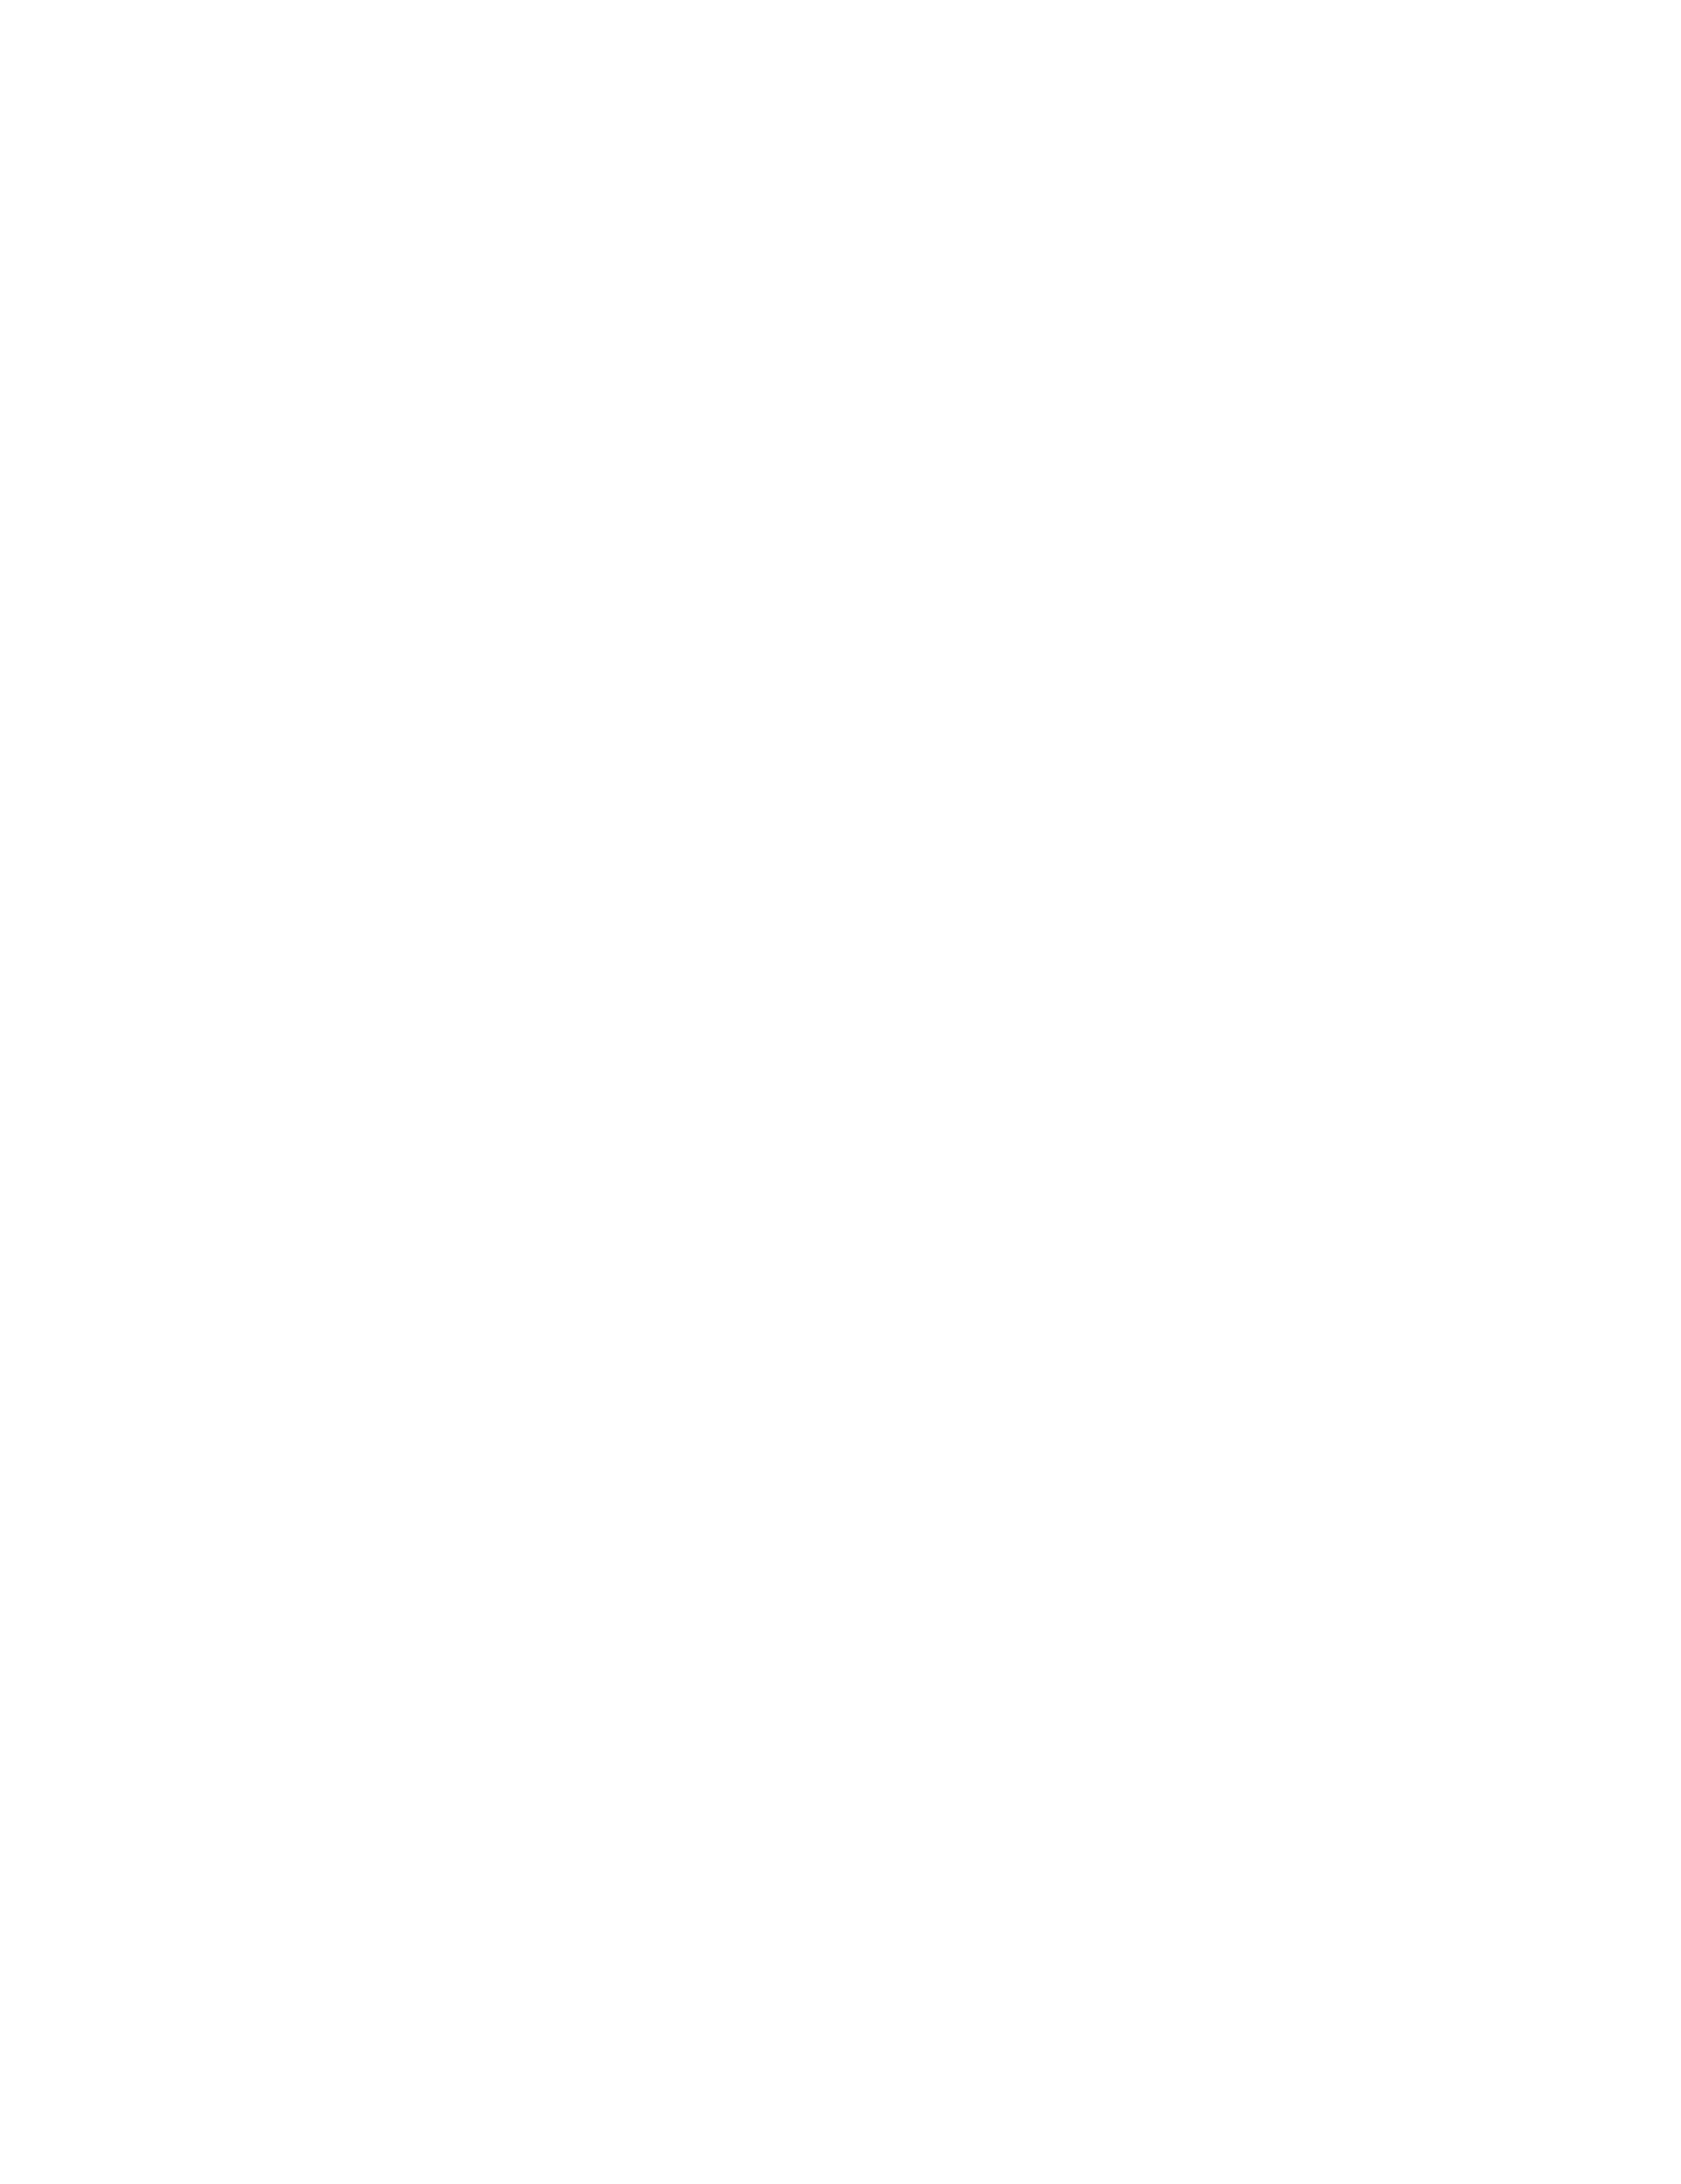 TDP Productions